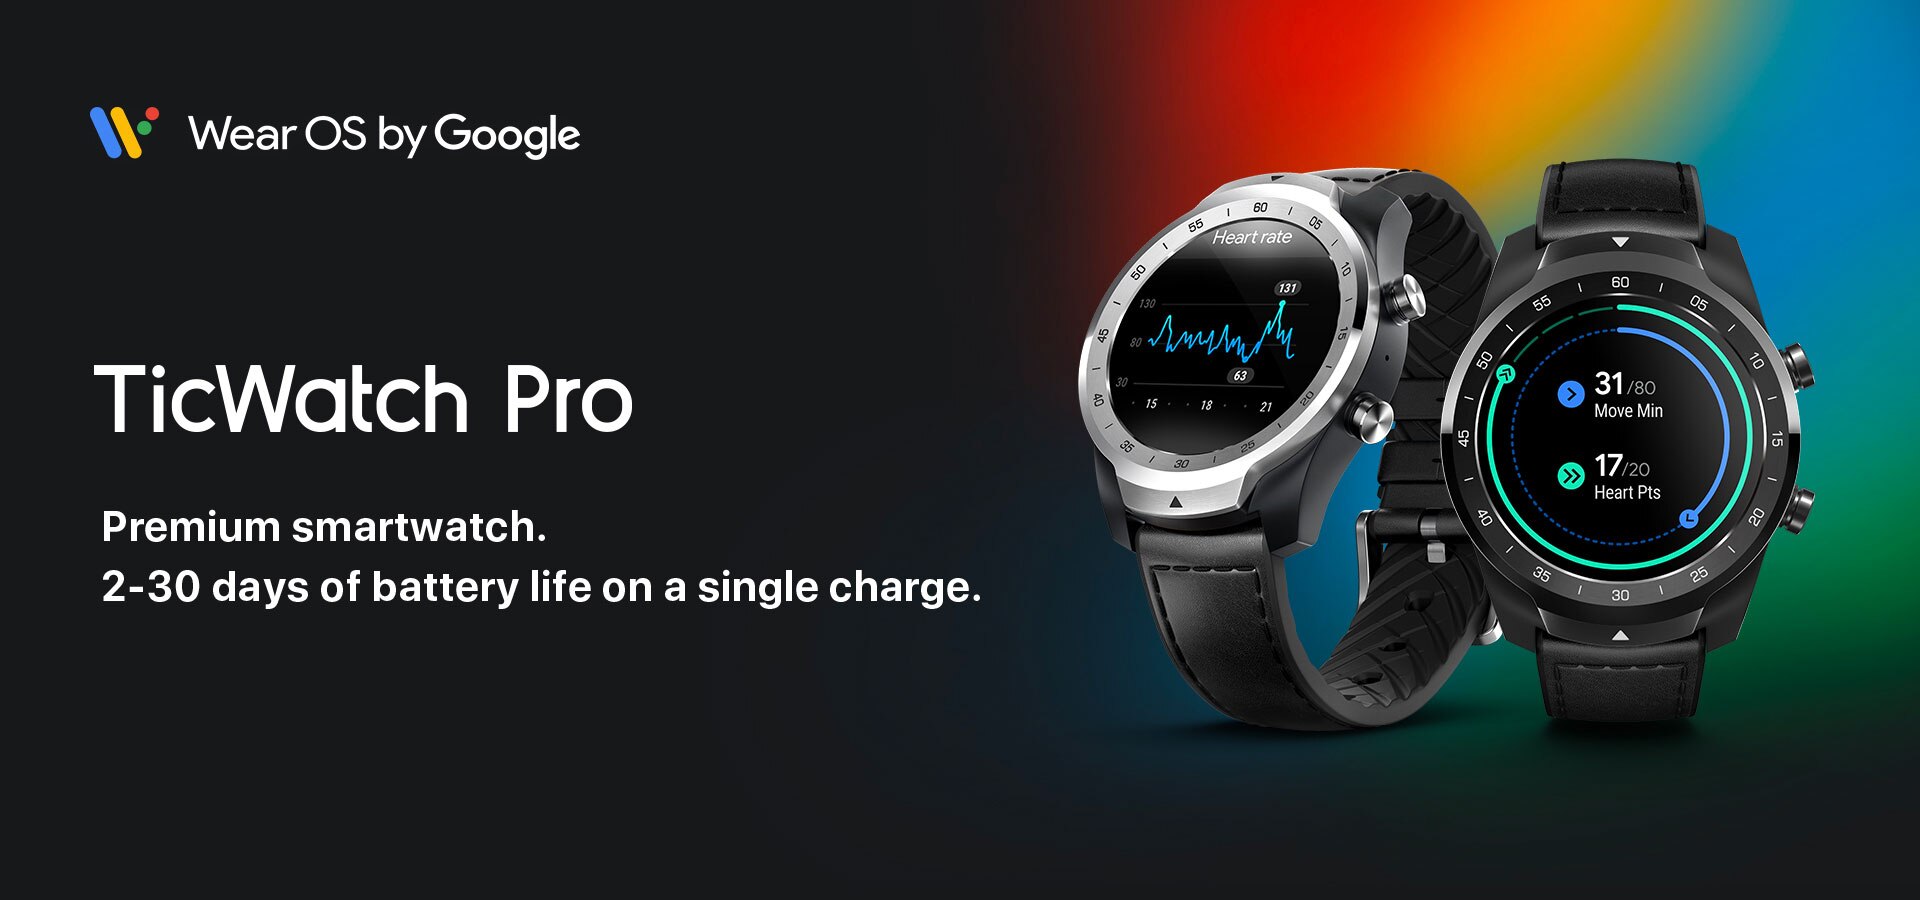 TicWatch Pro Smart Watch Men‘s Watch Wear OS by Google for iOS& Android NFC Payment Built in GPS Waterproof Bluetooth Smartwatch